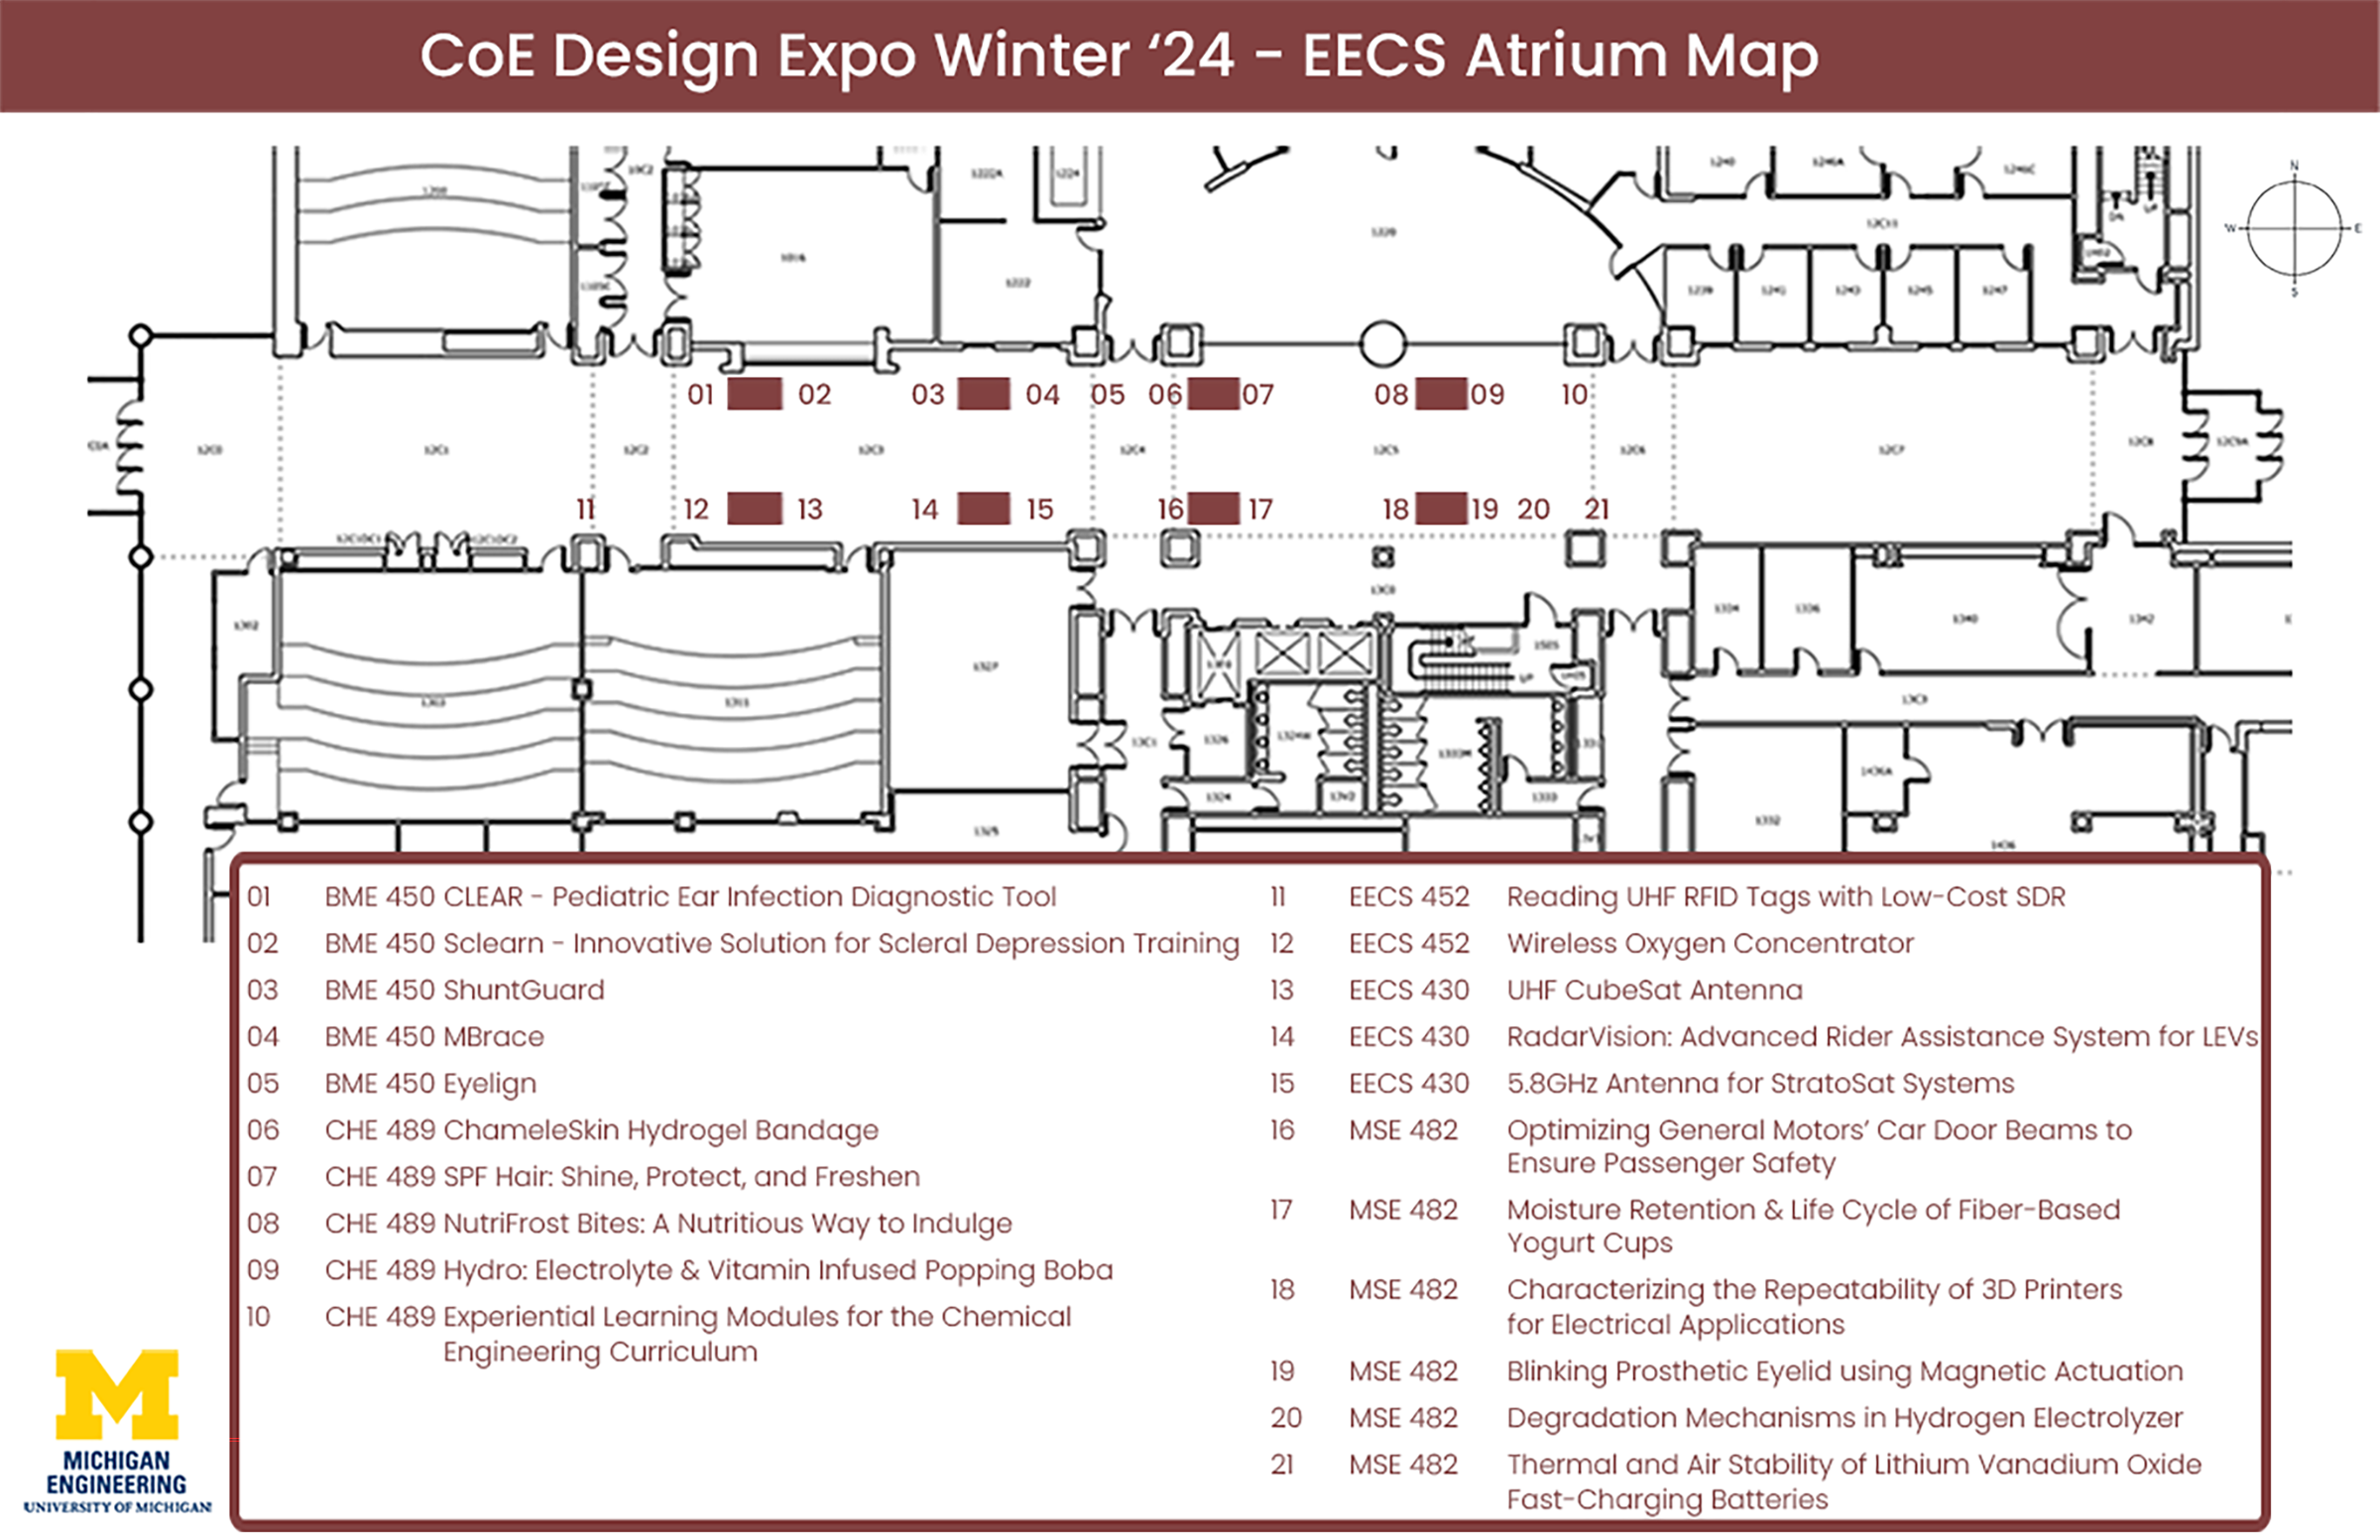 A map of GG Brown 3rd Floor for the Fall 2022 Design Expo.